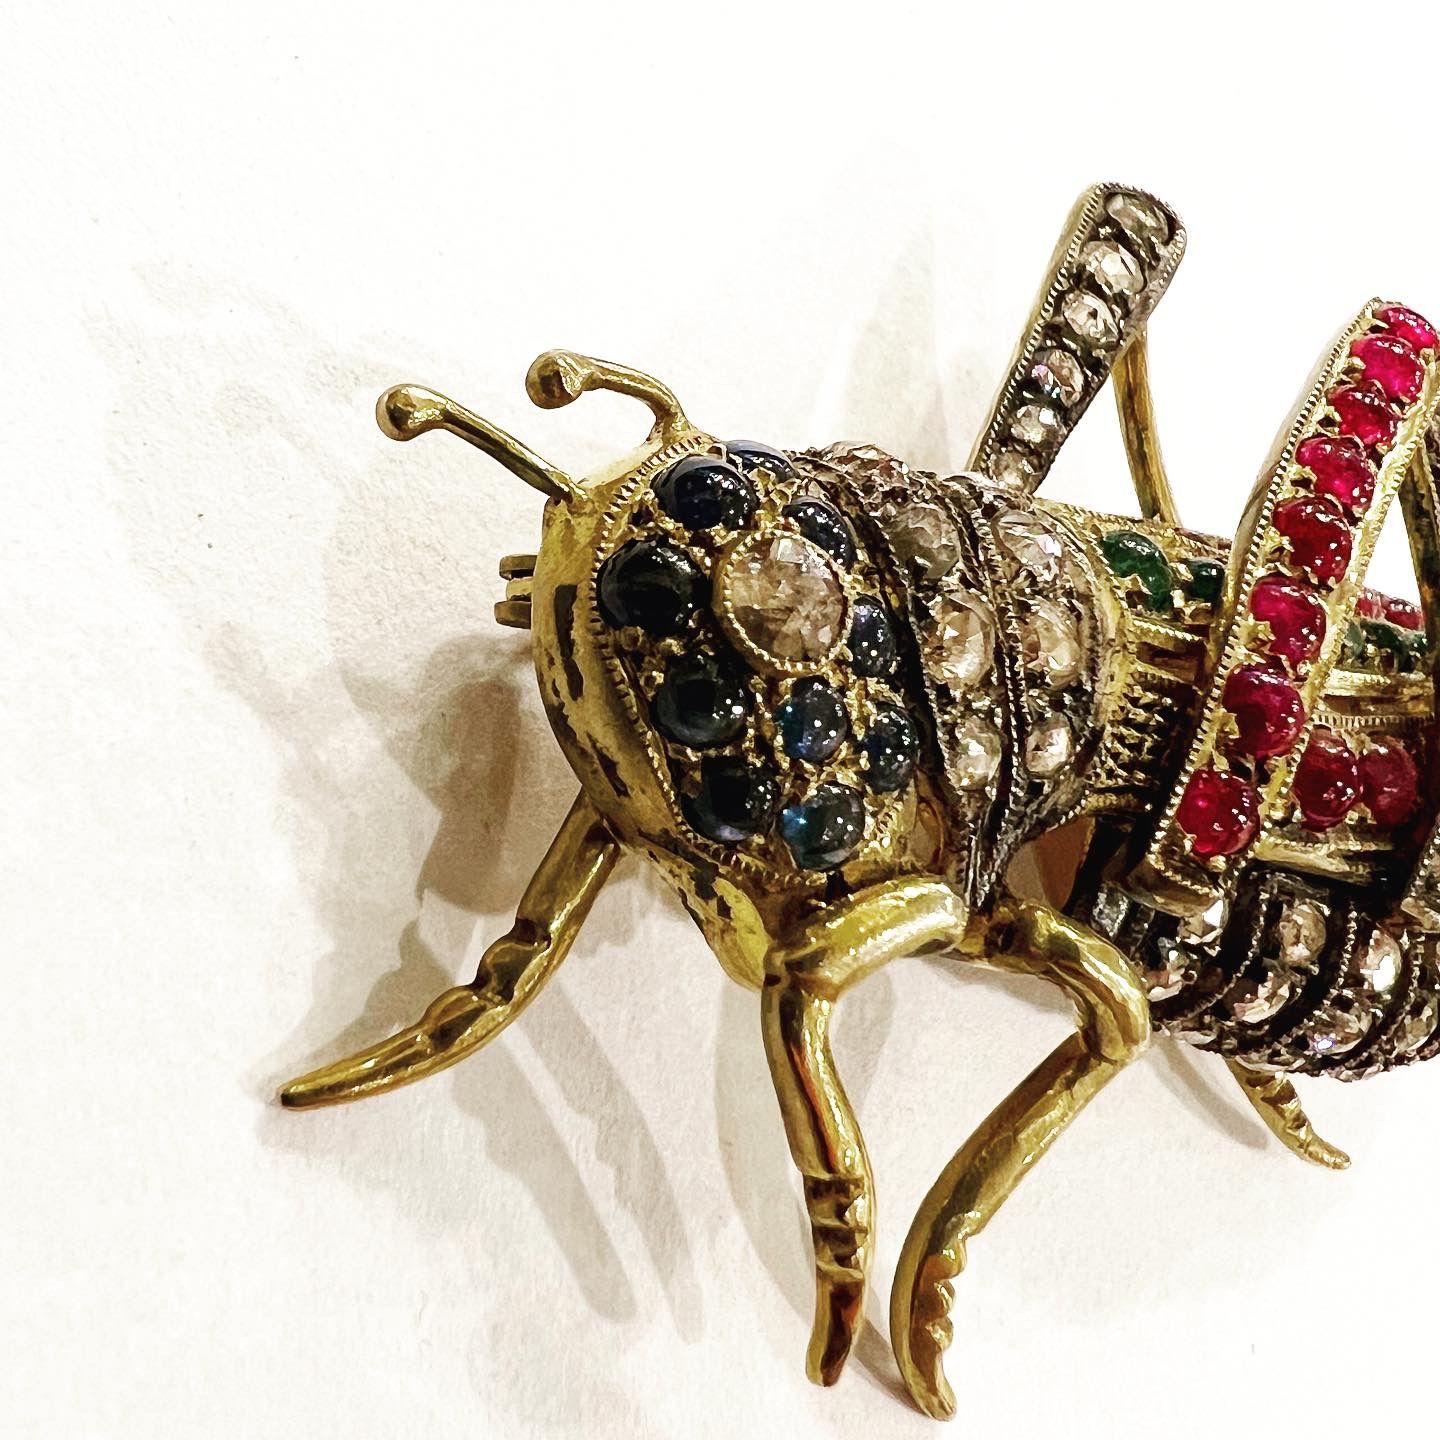 Grasshopper or Cricket form brooch-pendant, set with rose cut diamonds and cabochon sapphires, emeralds and rubys.
Total aproximated diamonds weight: 2.25 carats.
Total aproximated rubys weight: 2.2 carats.
Total aproximated sapphires weight: 0.85